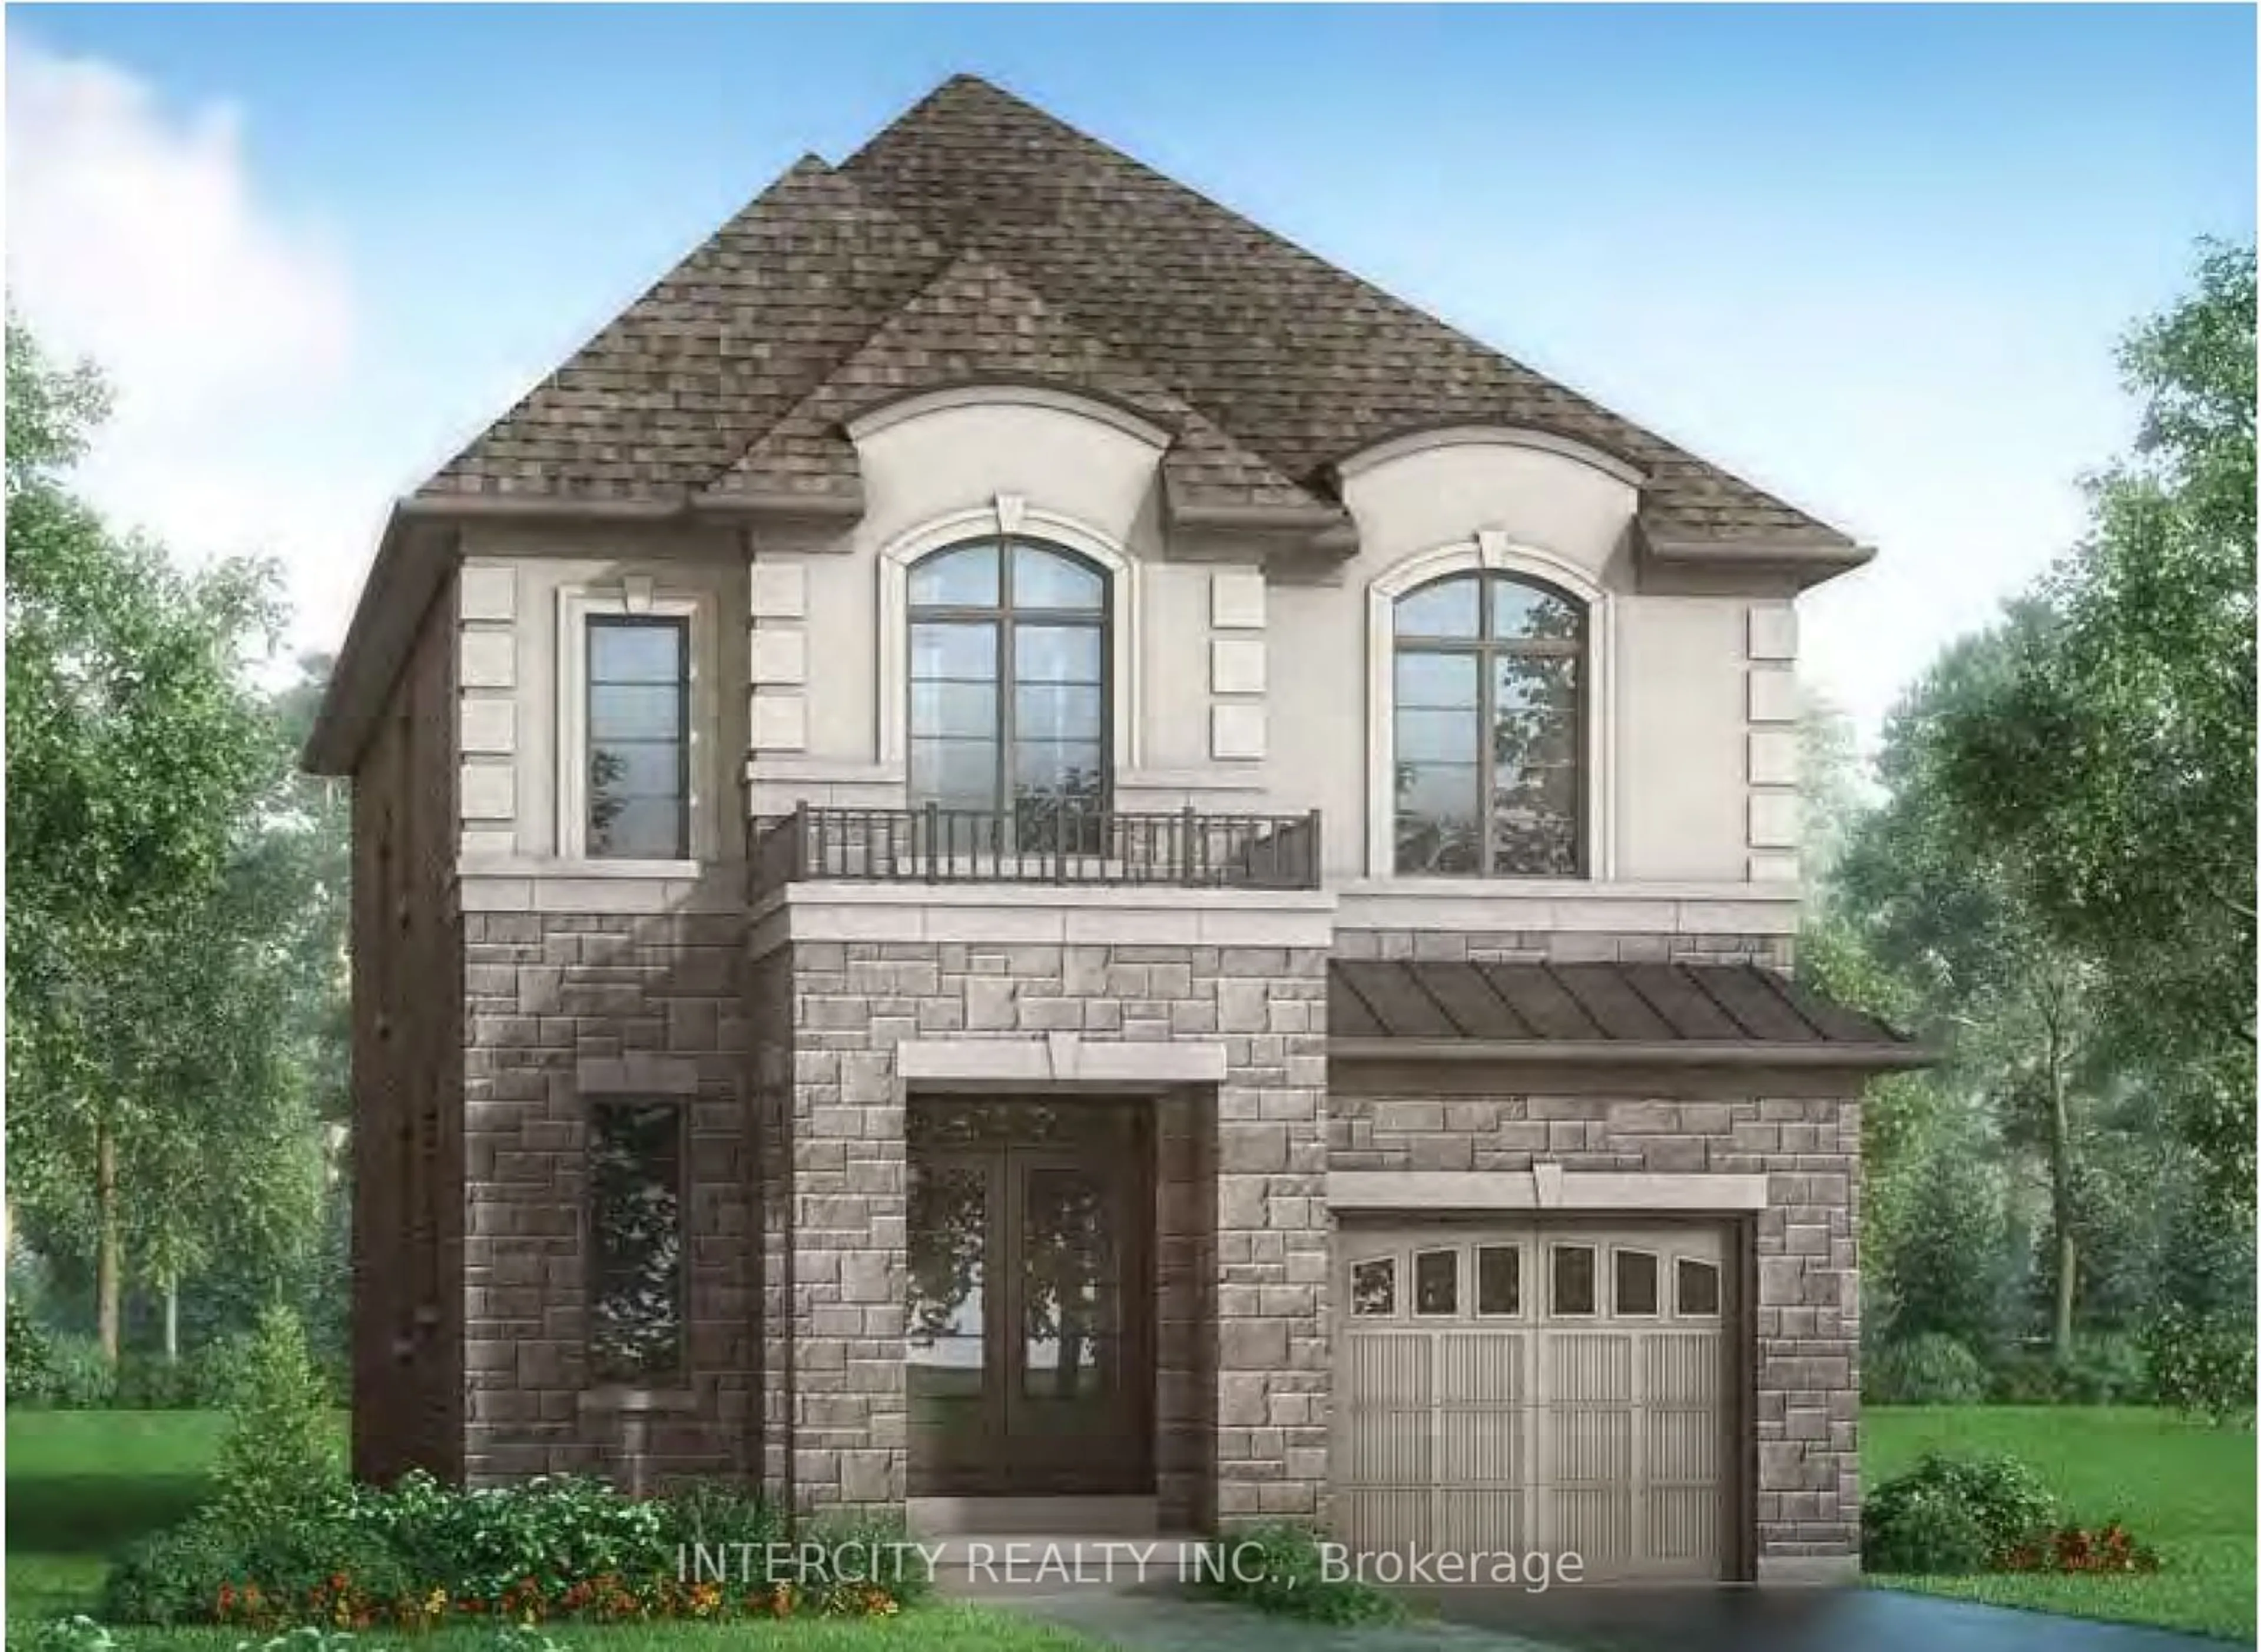 Home with brick exterior material for 10 Ed Ewert Ave, Clarington Ontario L1B 1G9